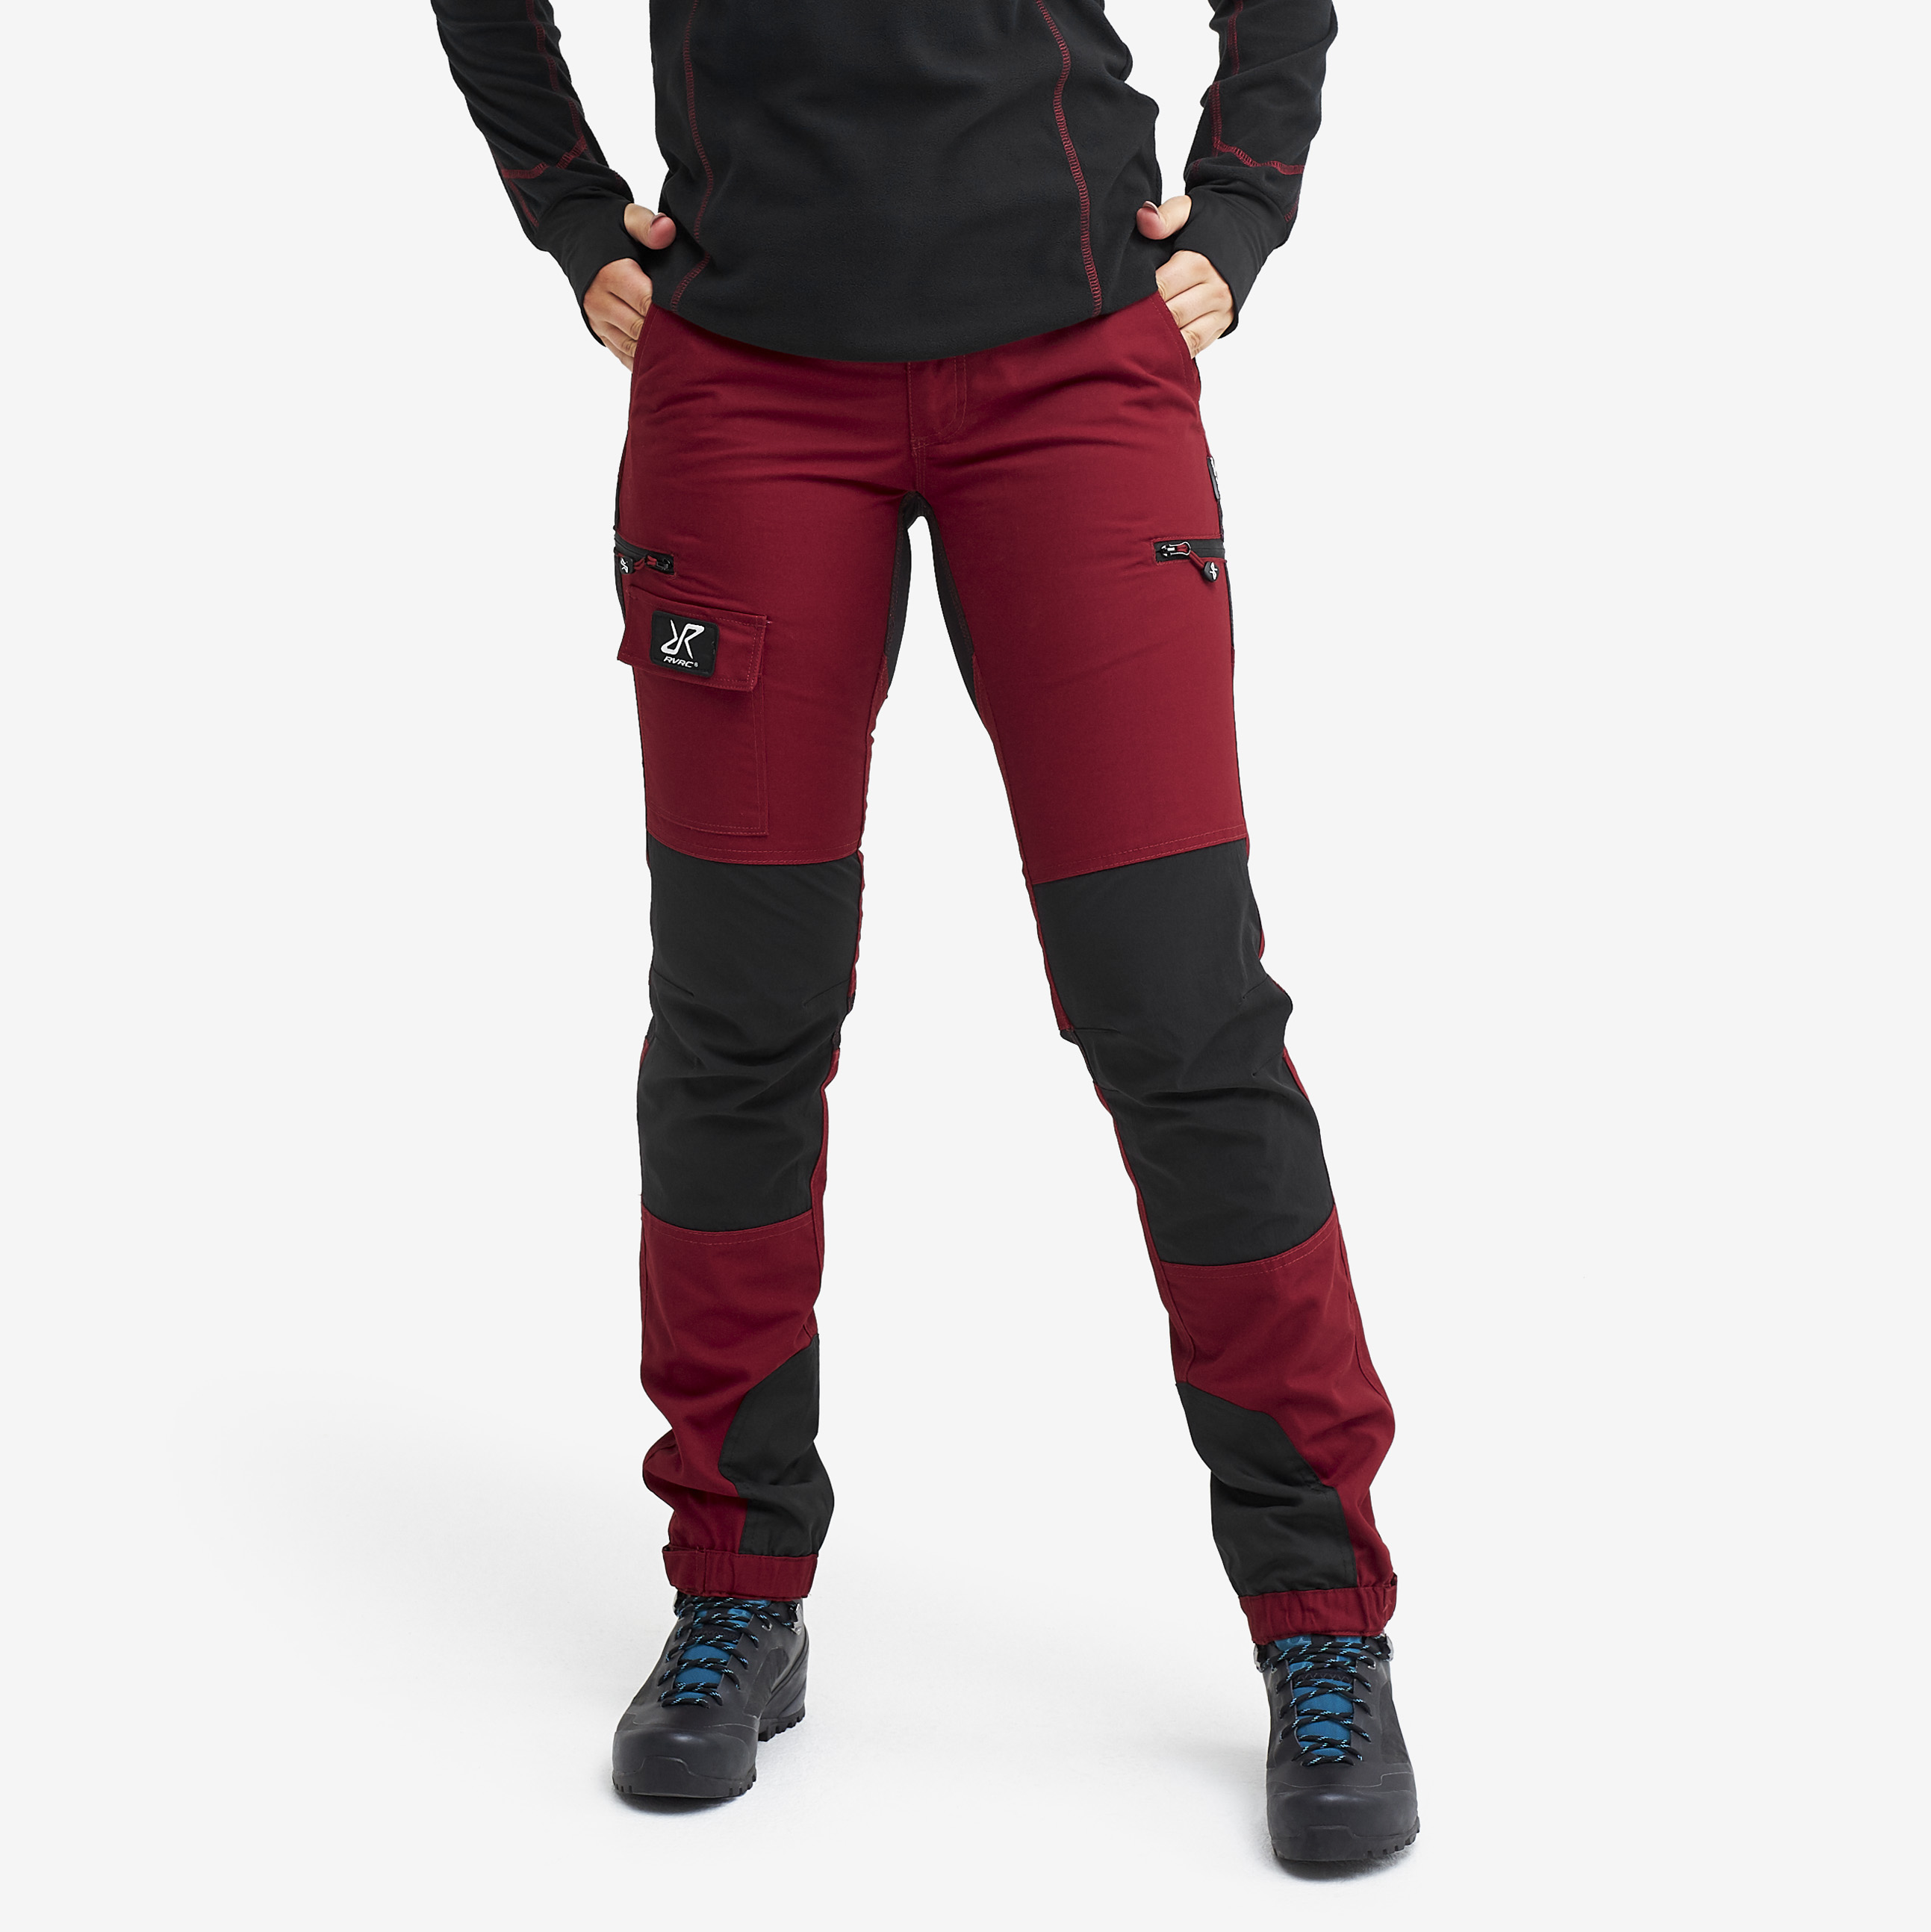 Nordwand Pants Wine Red Women